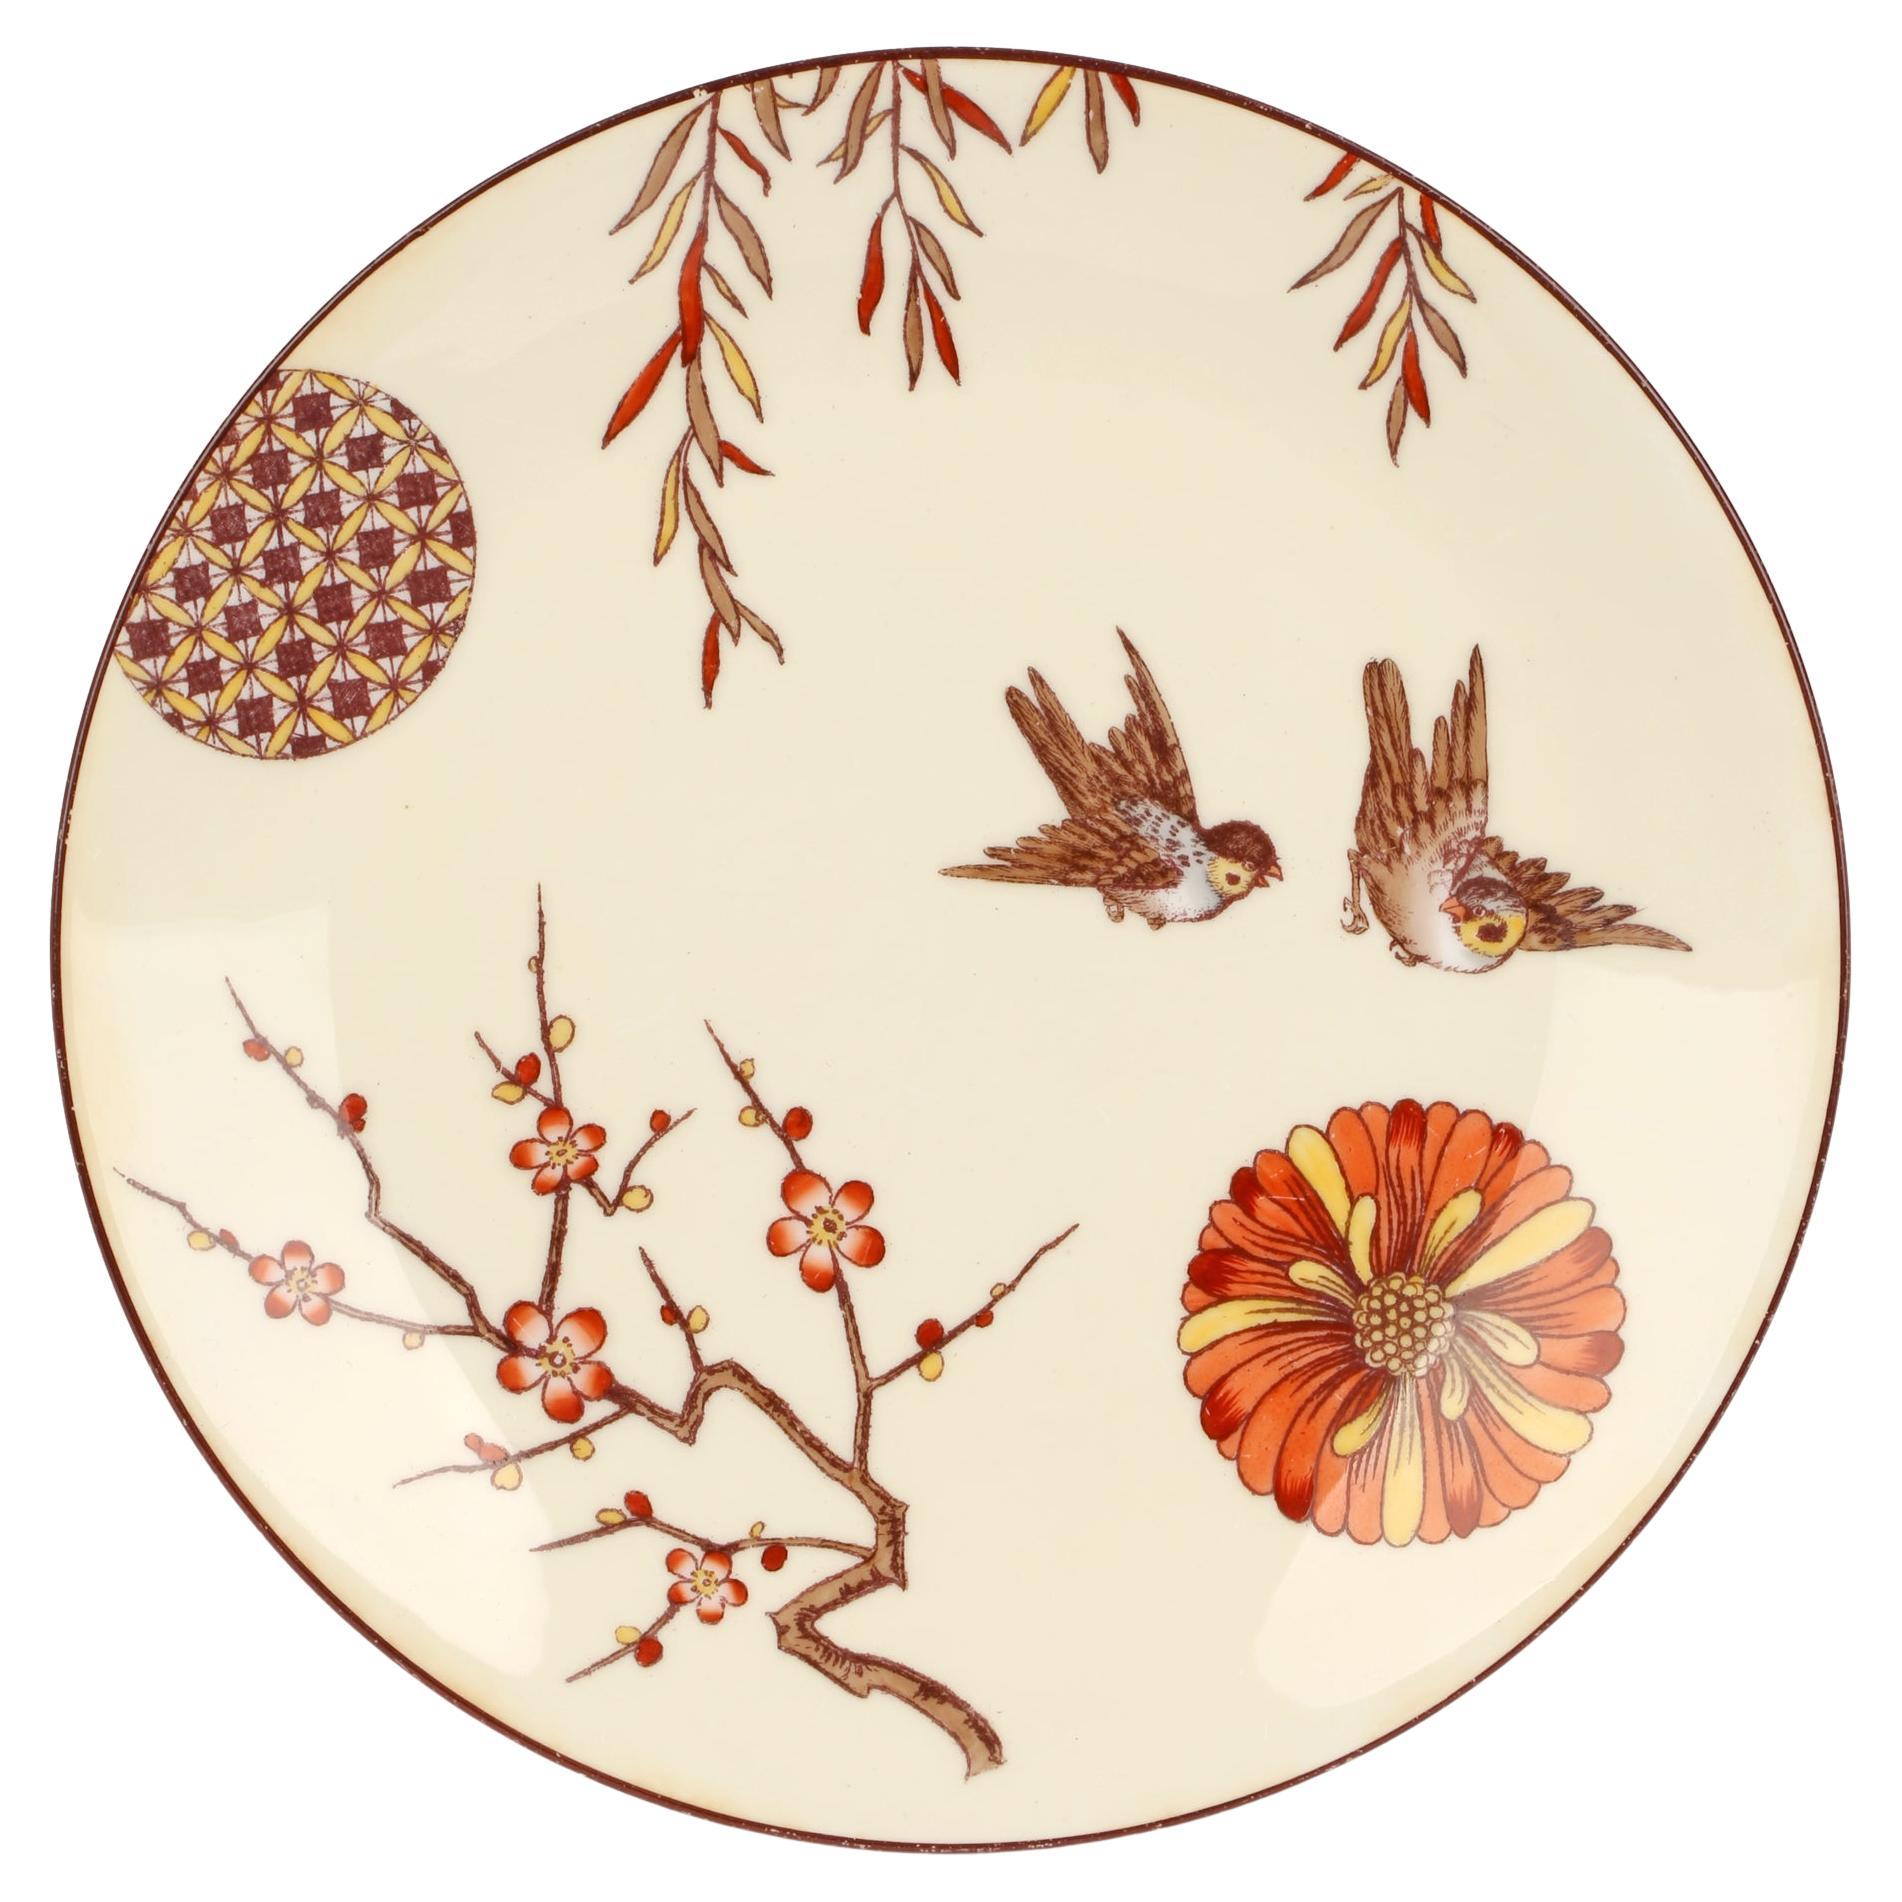 Minton Porcelain Cabinet Plate Attributed to Christopher Dresser, 1880